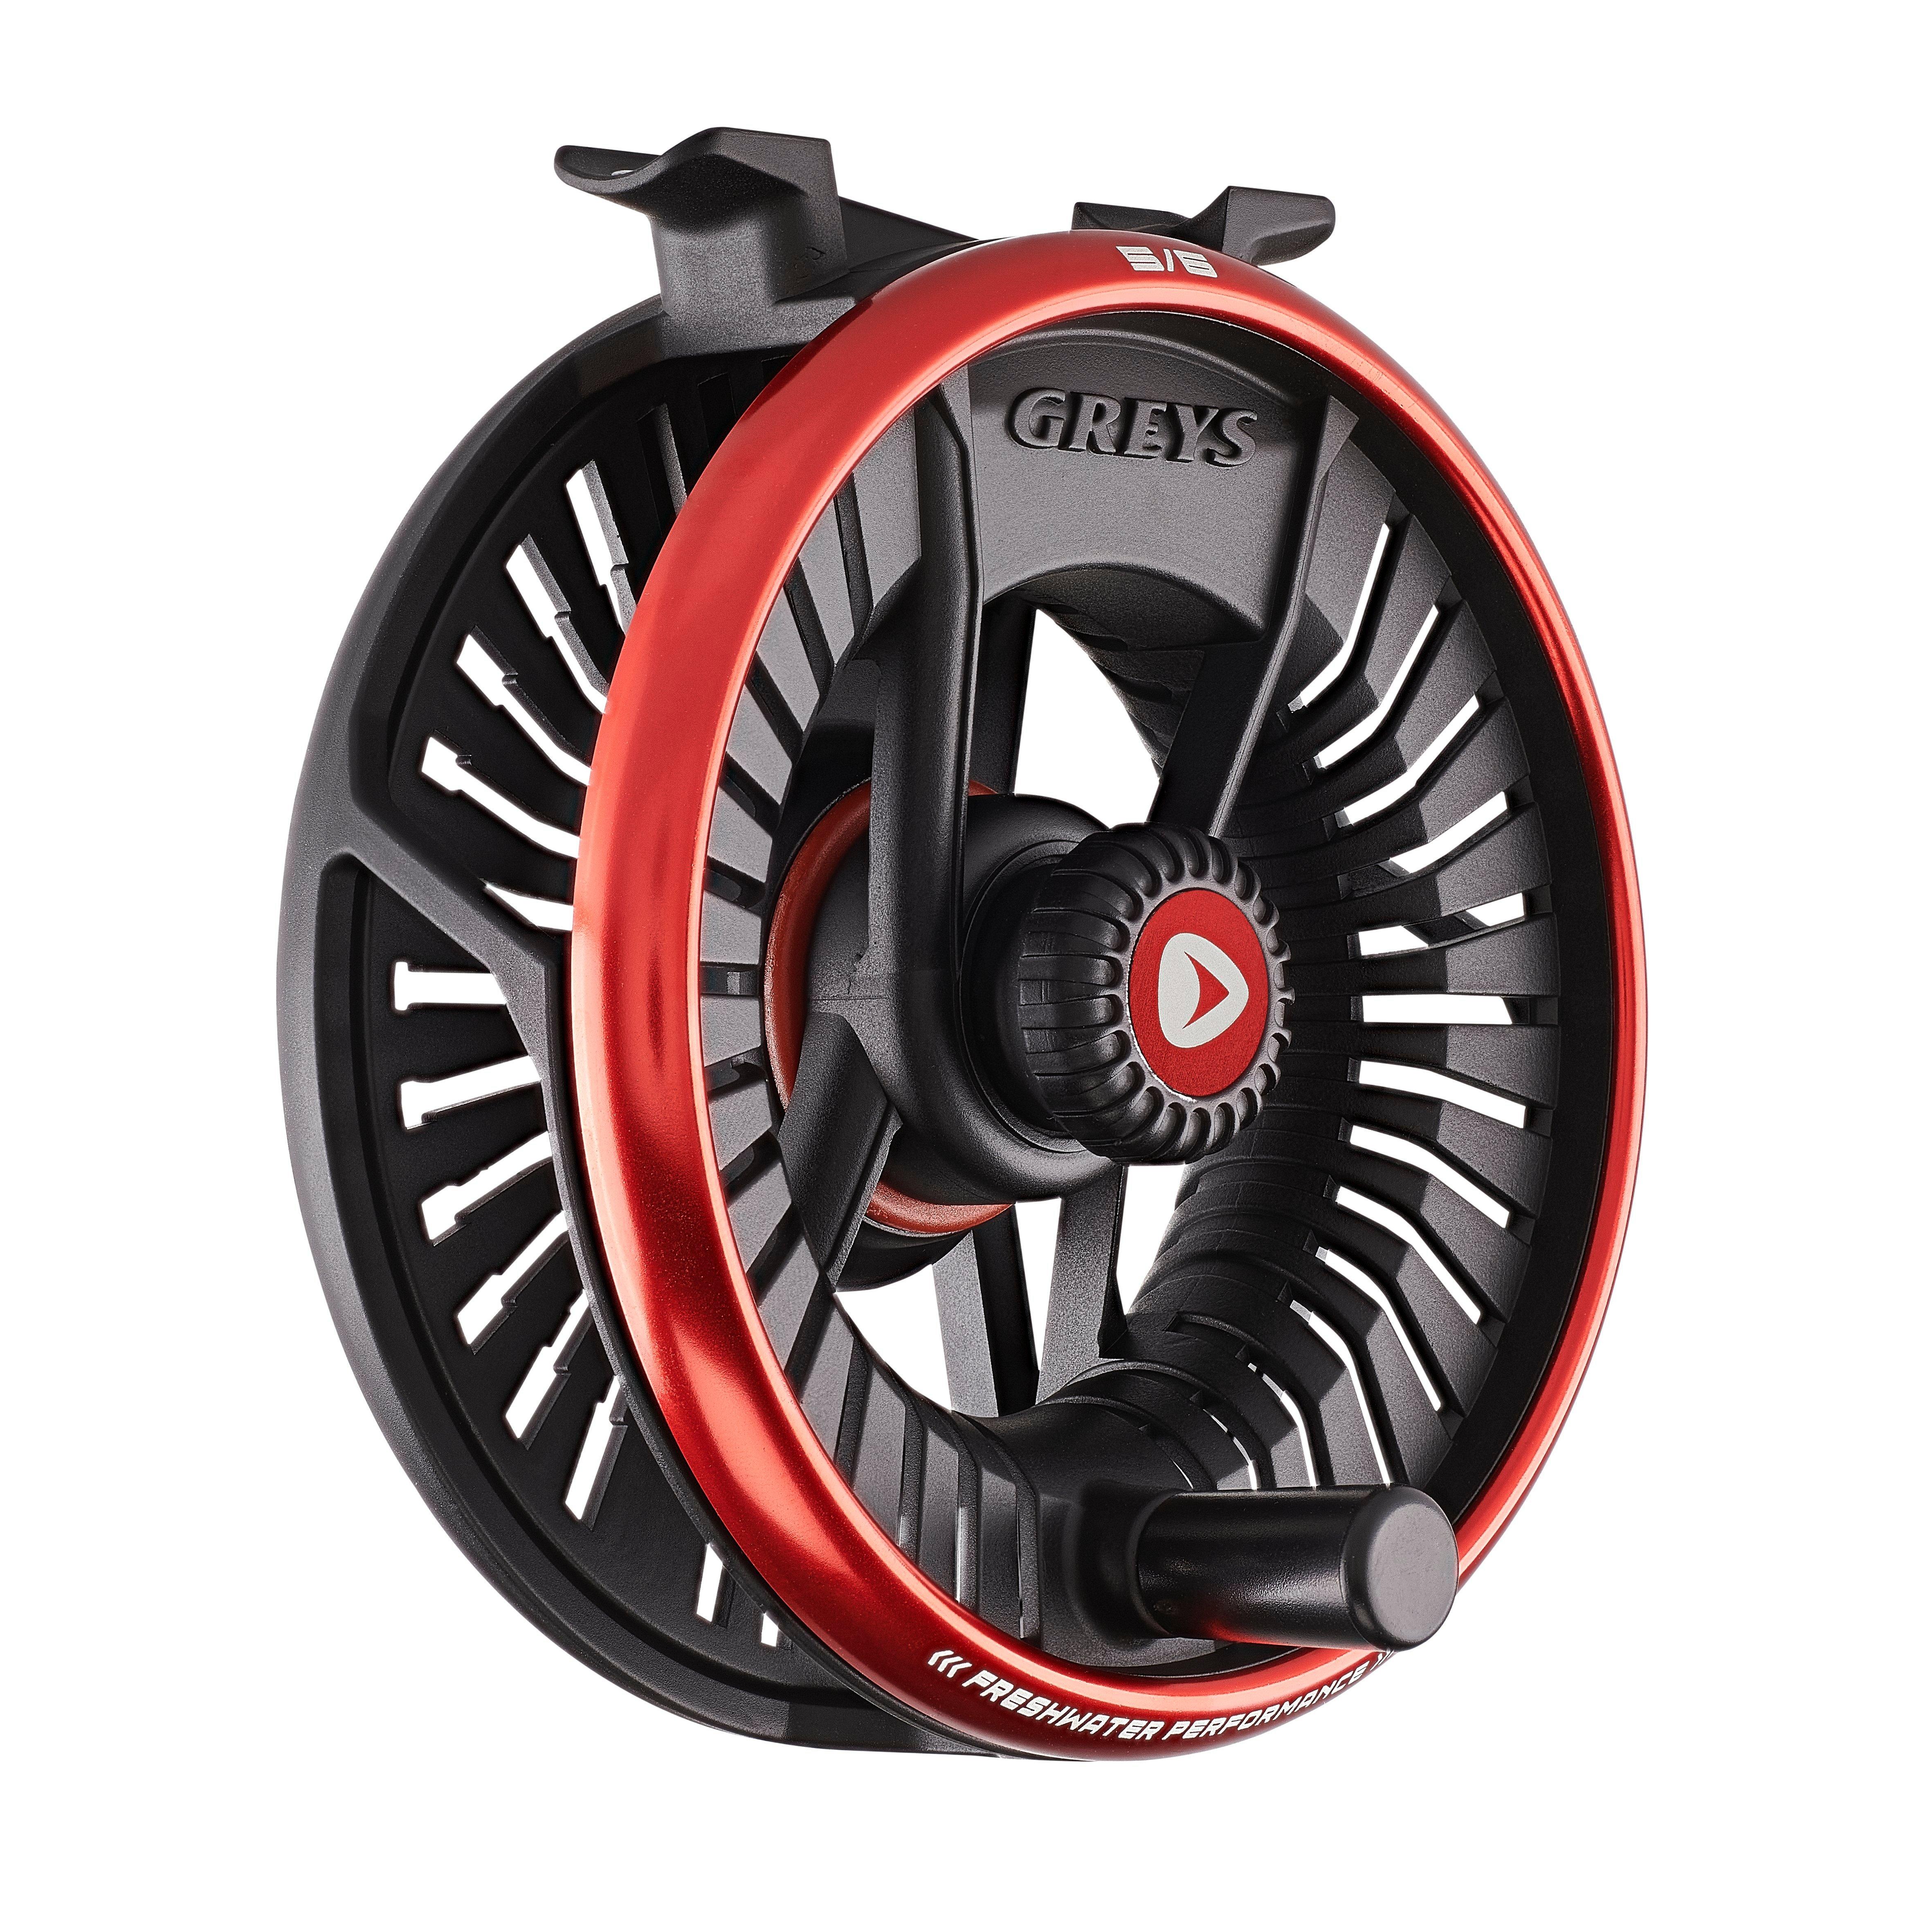 Greys Tail Spare Spool Reel  w/ Free Shipping and Handling